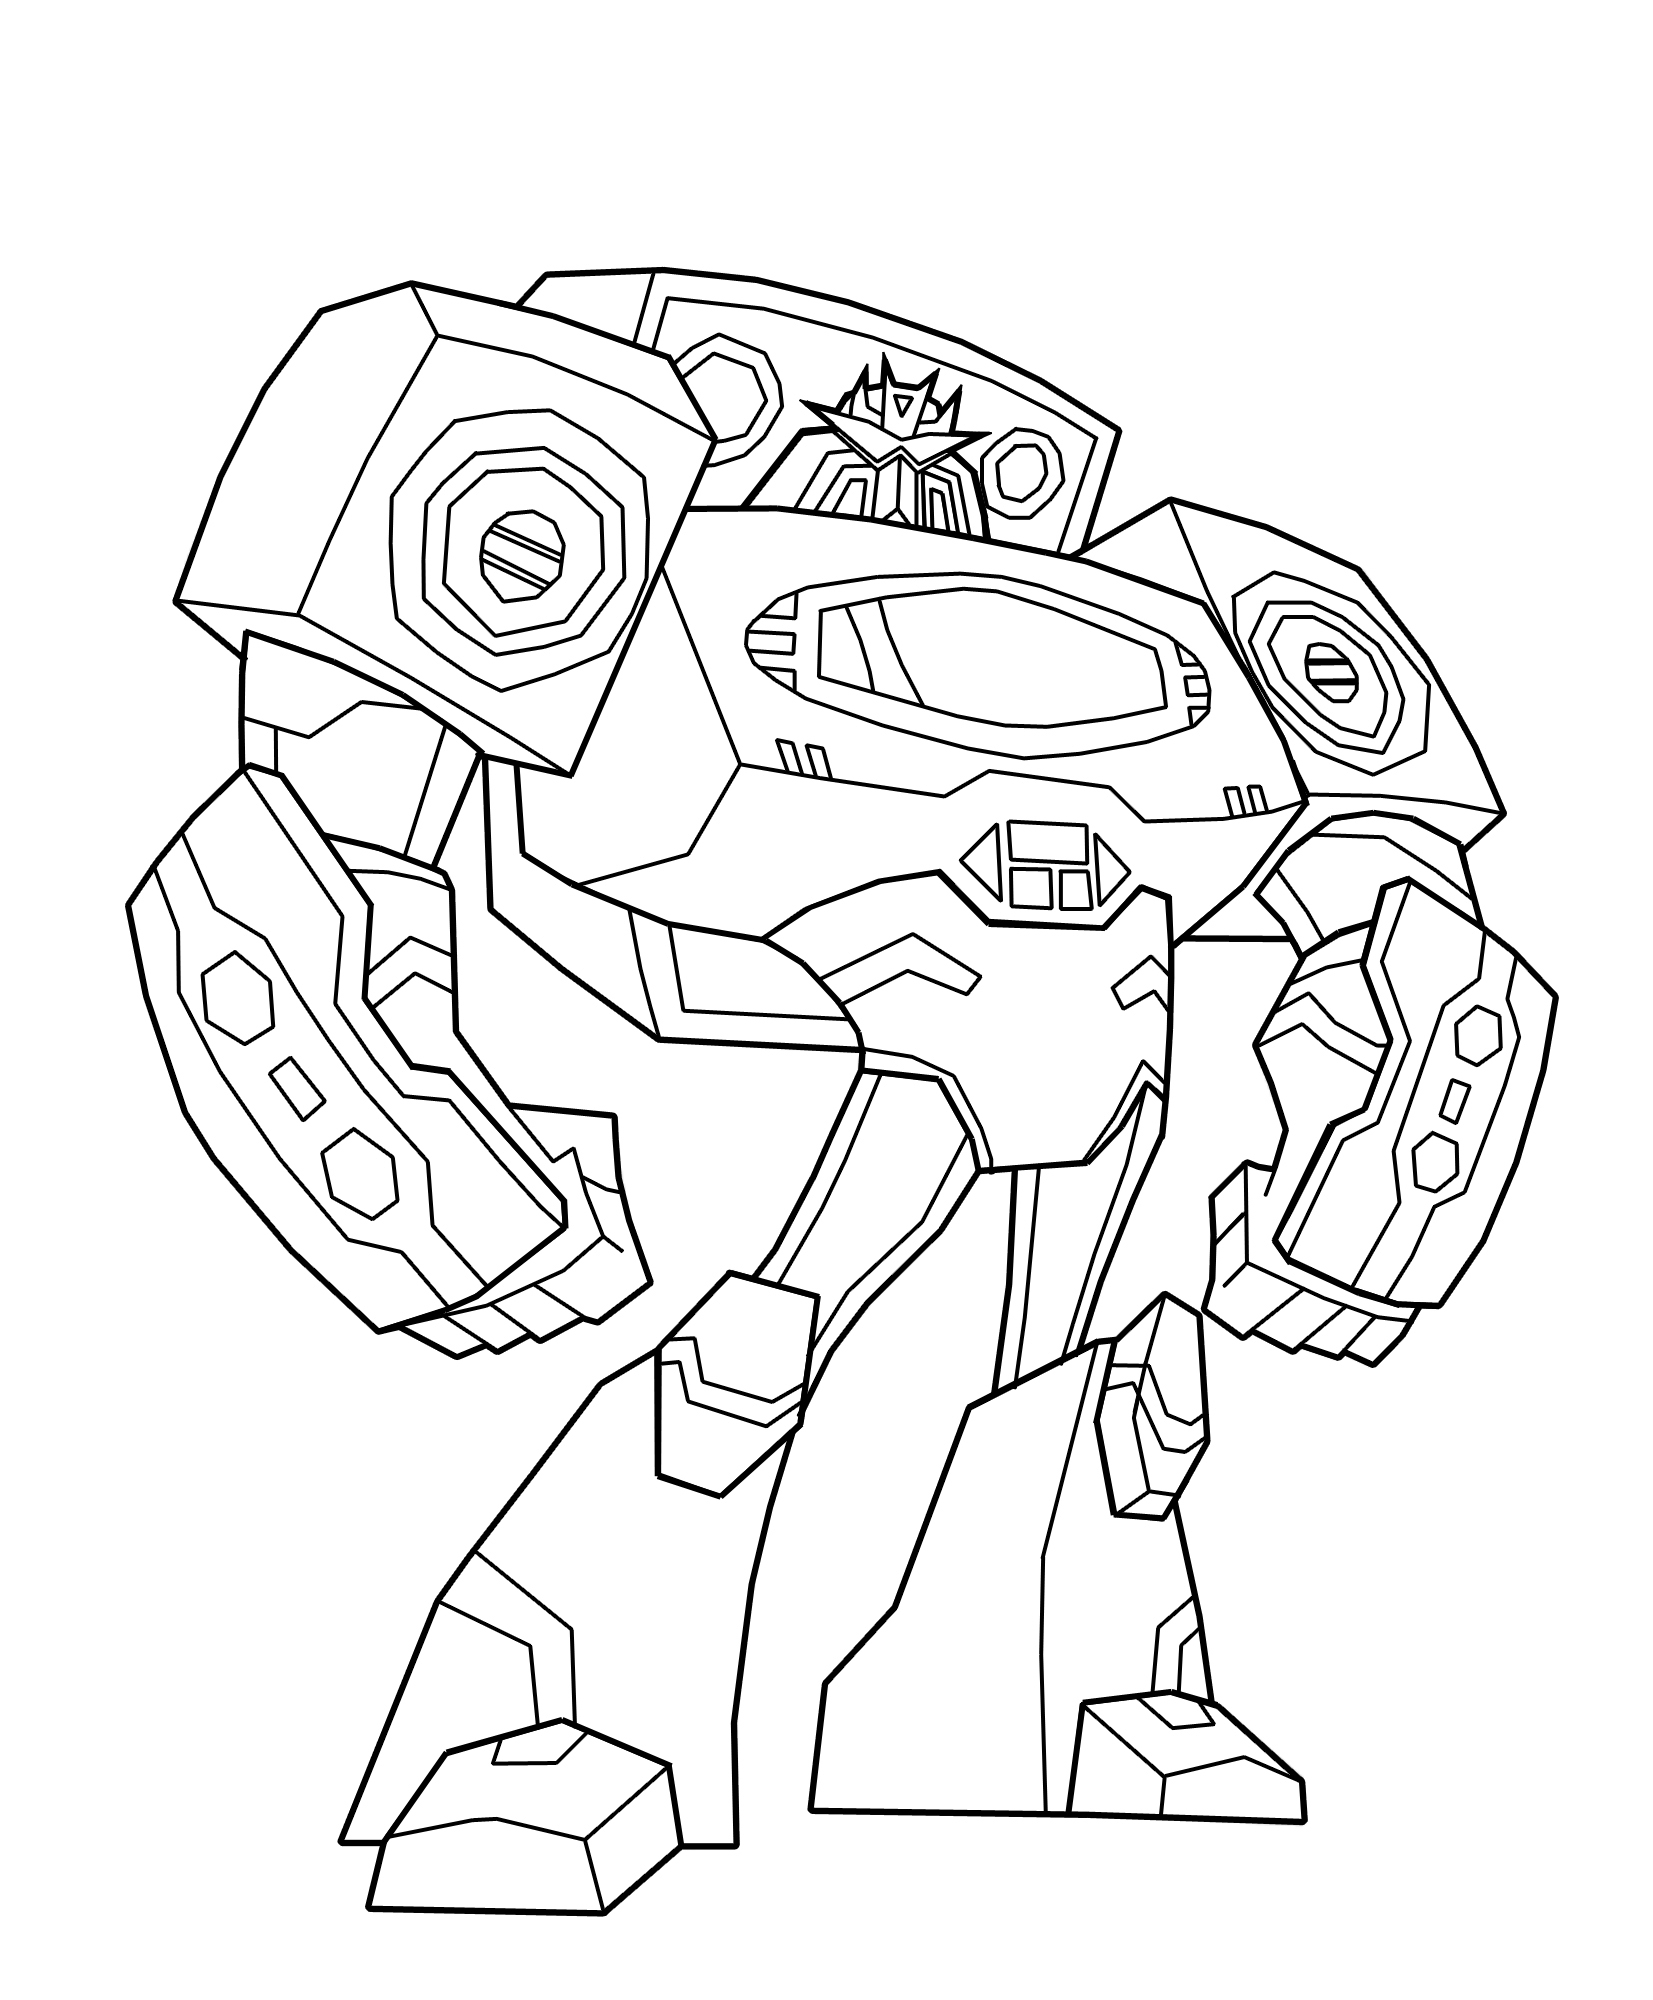 Transformers Grimlock Coloring Pages at GetColorings.com ...